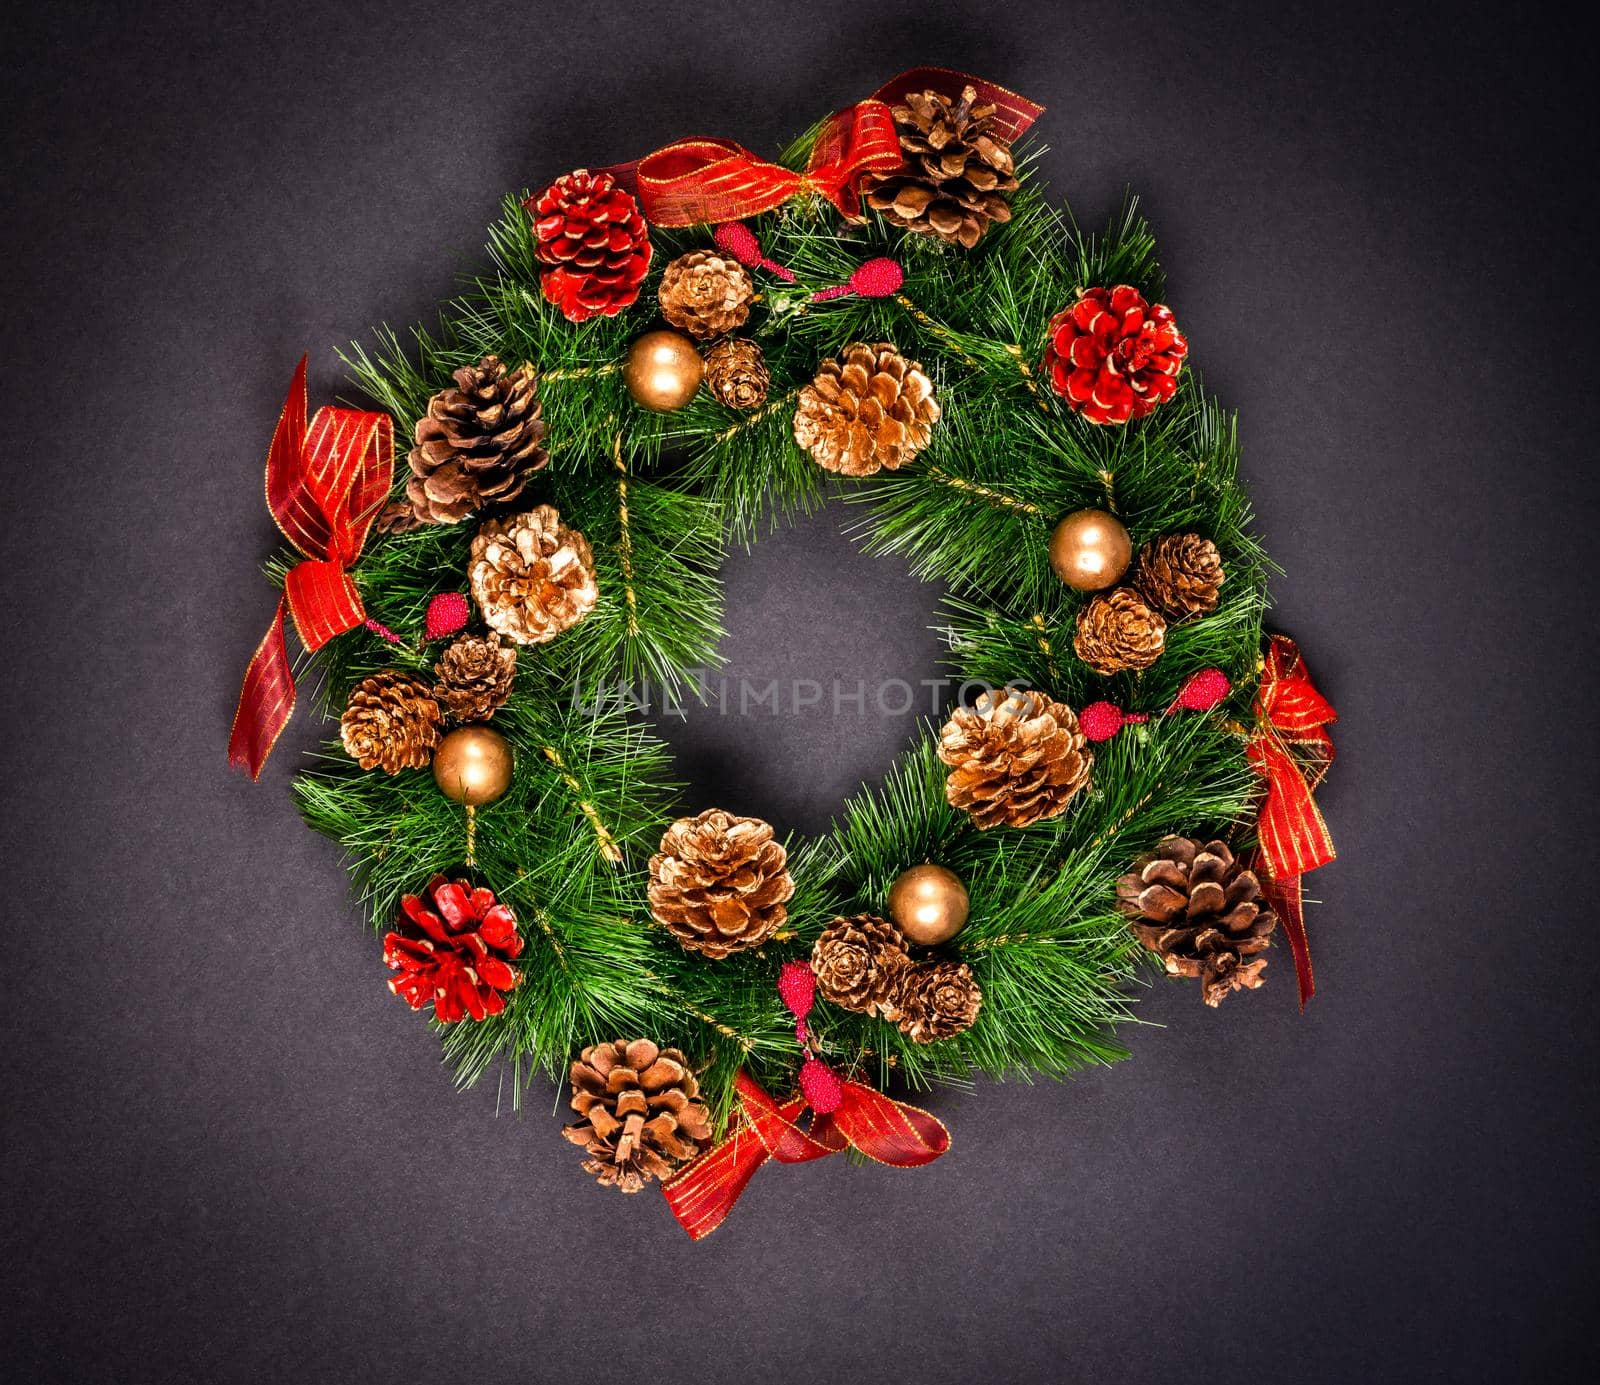 Christmas wreath with pinecones on a black background